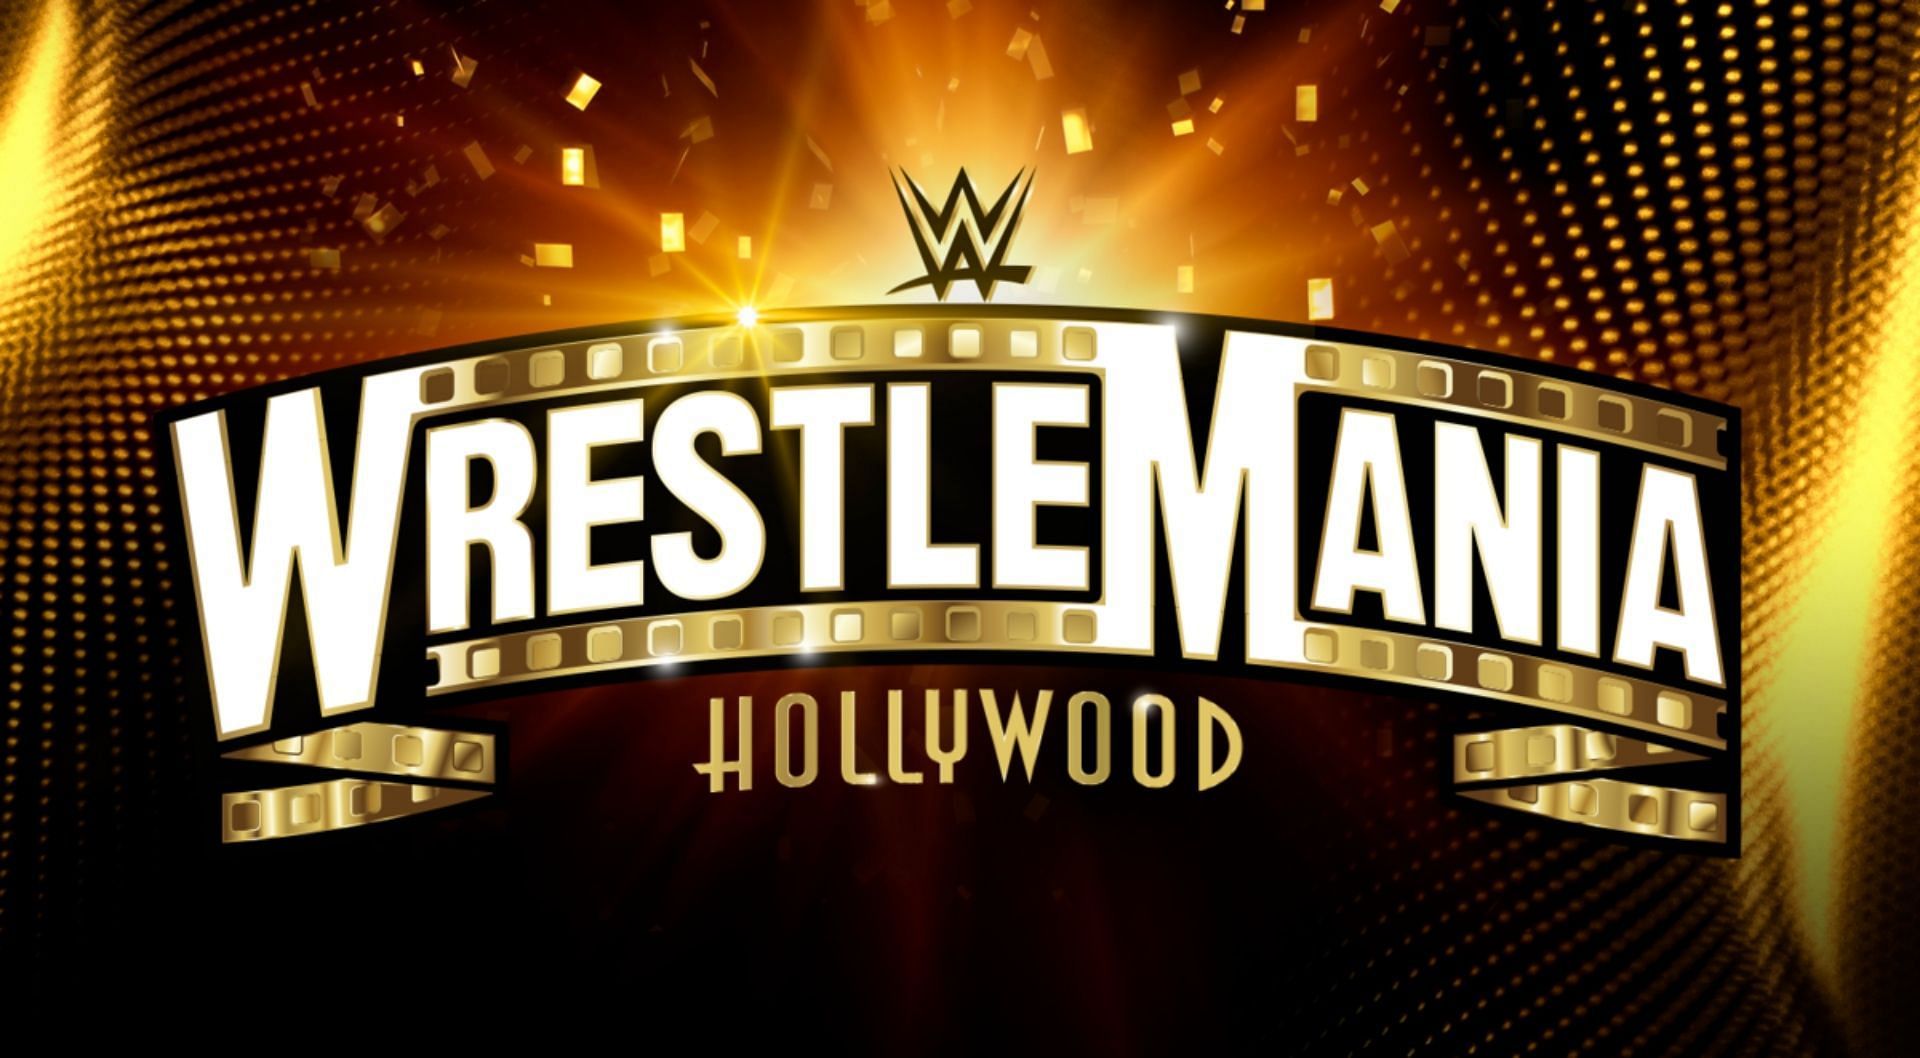 WrestleMania 39 is set to take place in Los Angeles on April 1st and 2nd